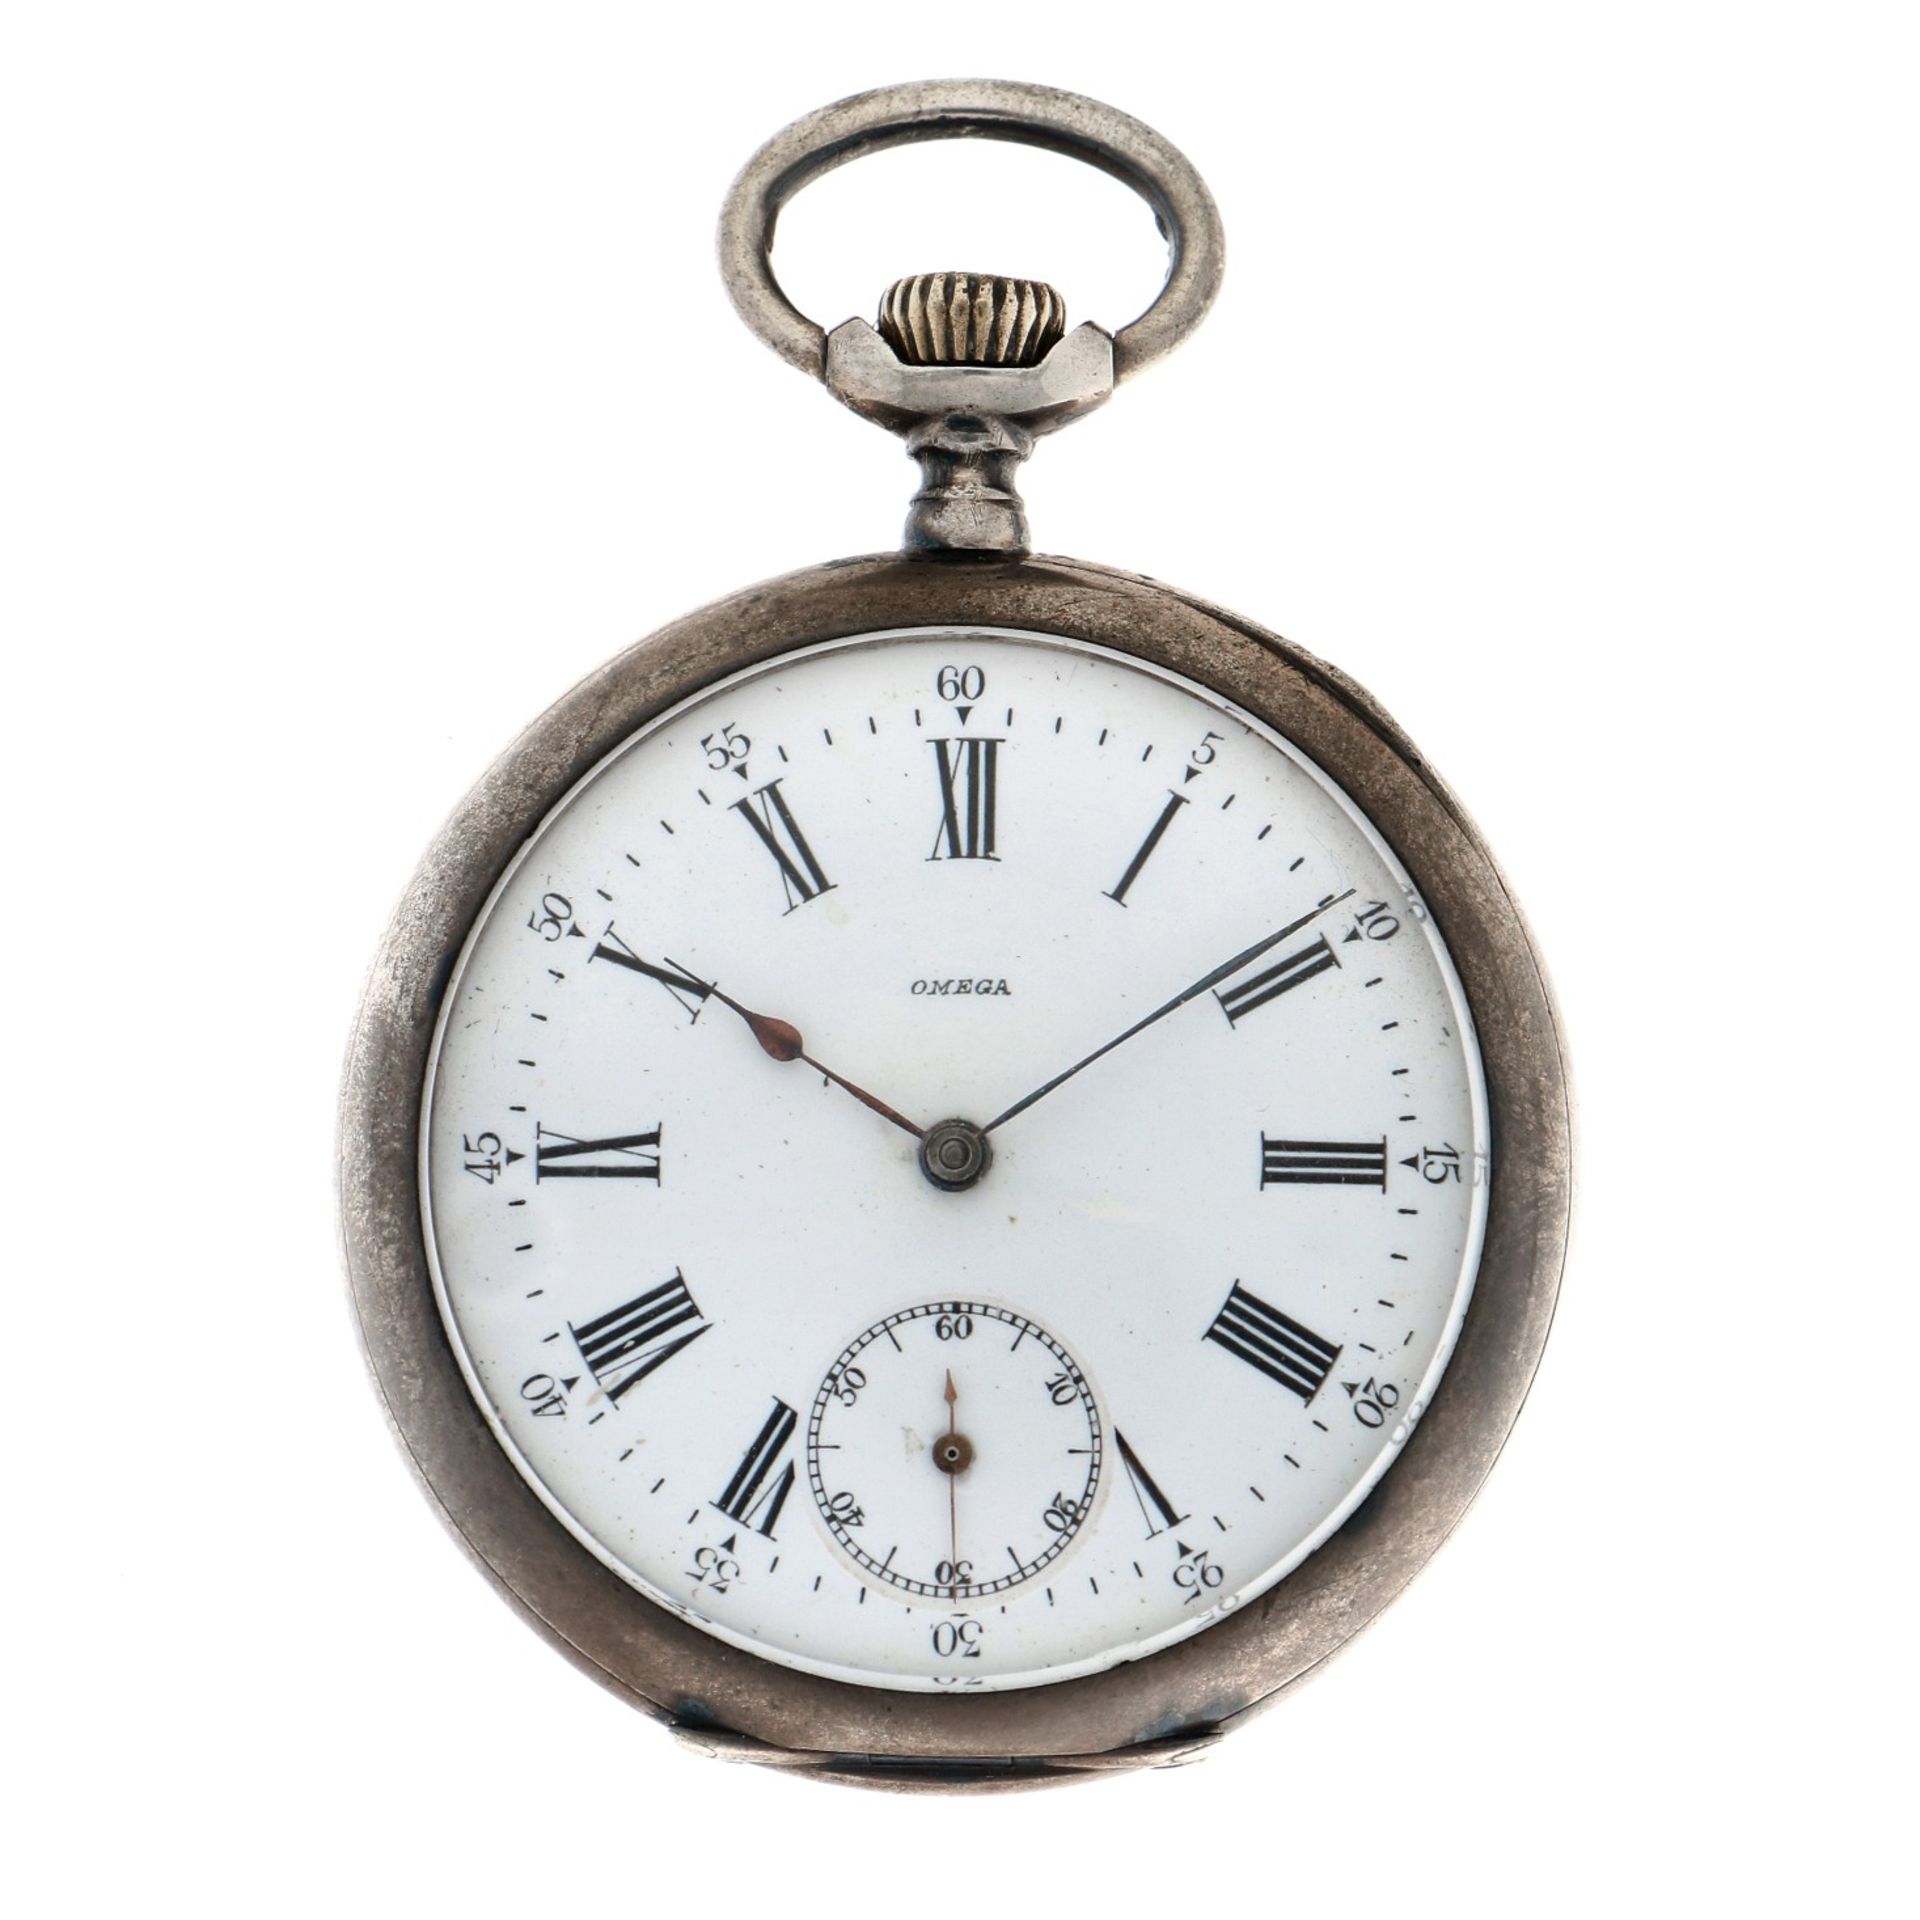 No Reserve - Omega Lever-Escapement silver 800/1000 - Men's pocketwatch - approx. 1958.